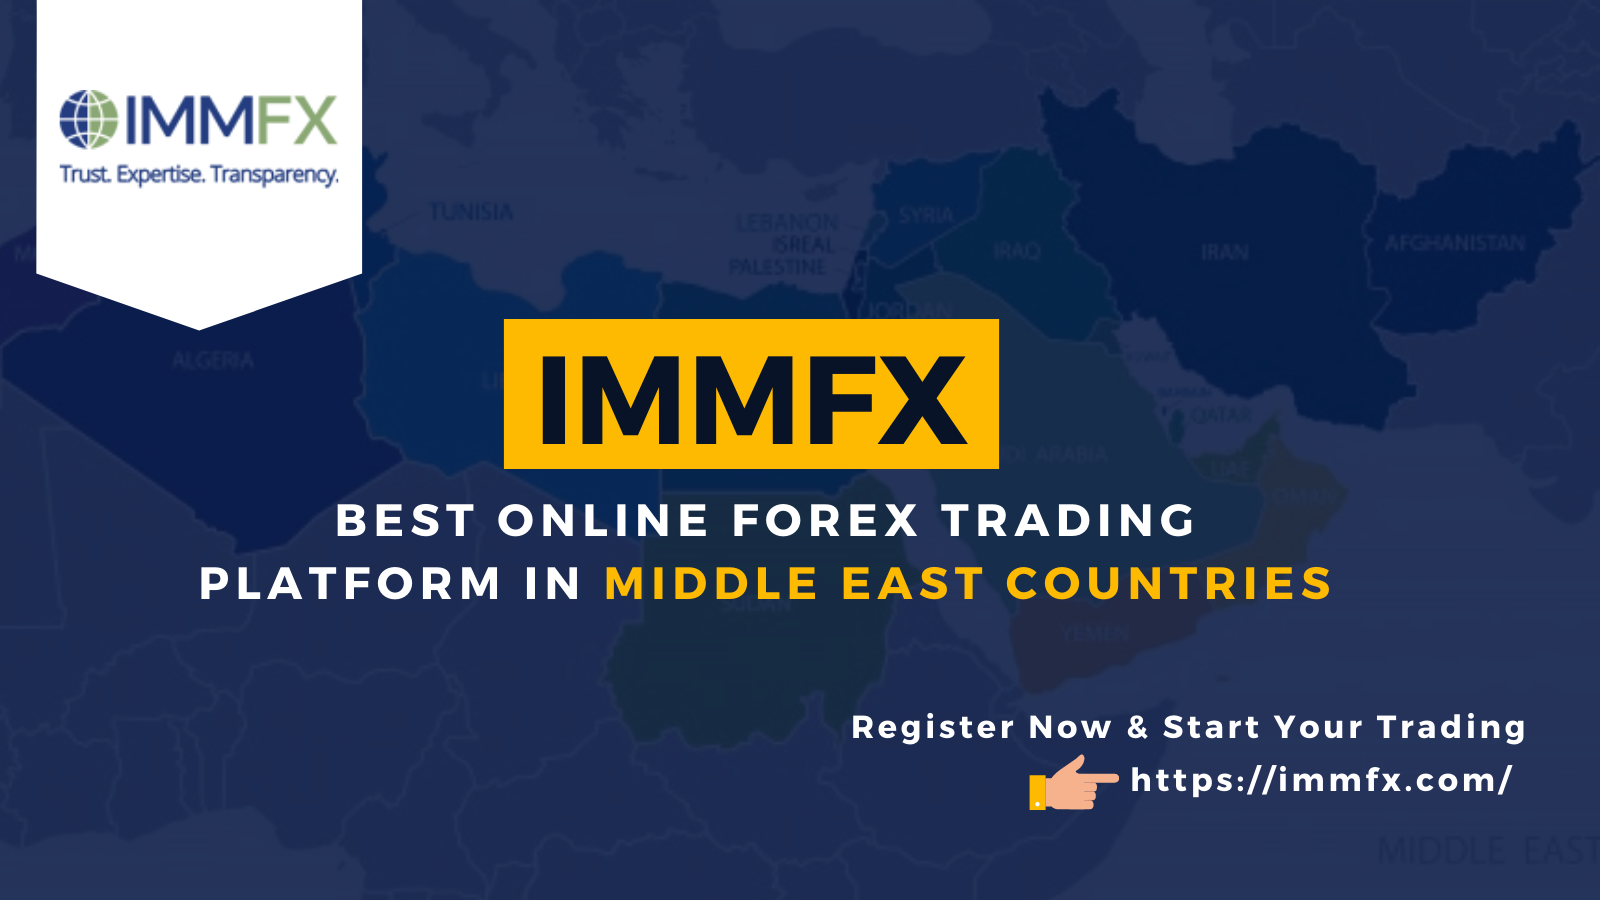 IMMFX Best online forex trading platform in Middle East Countries